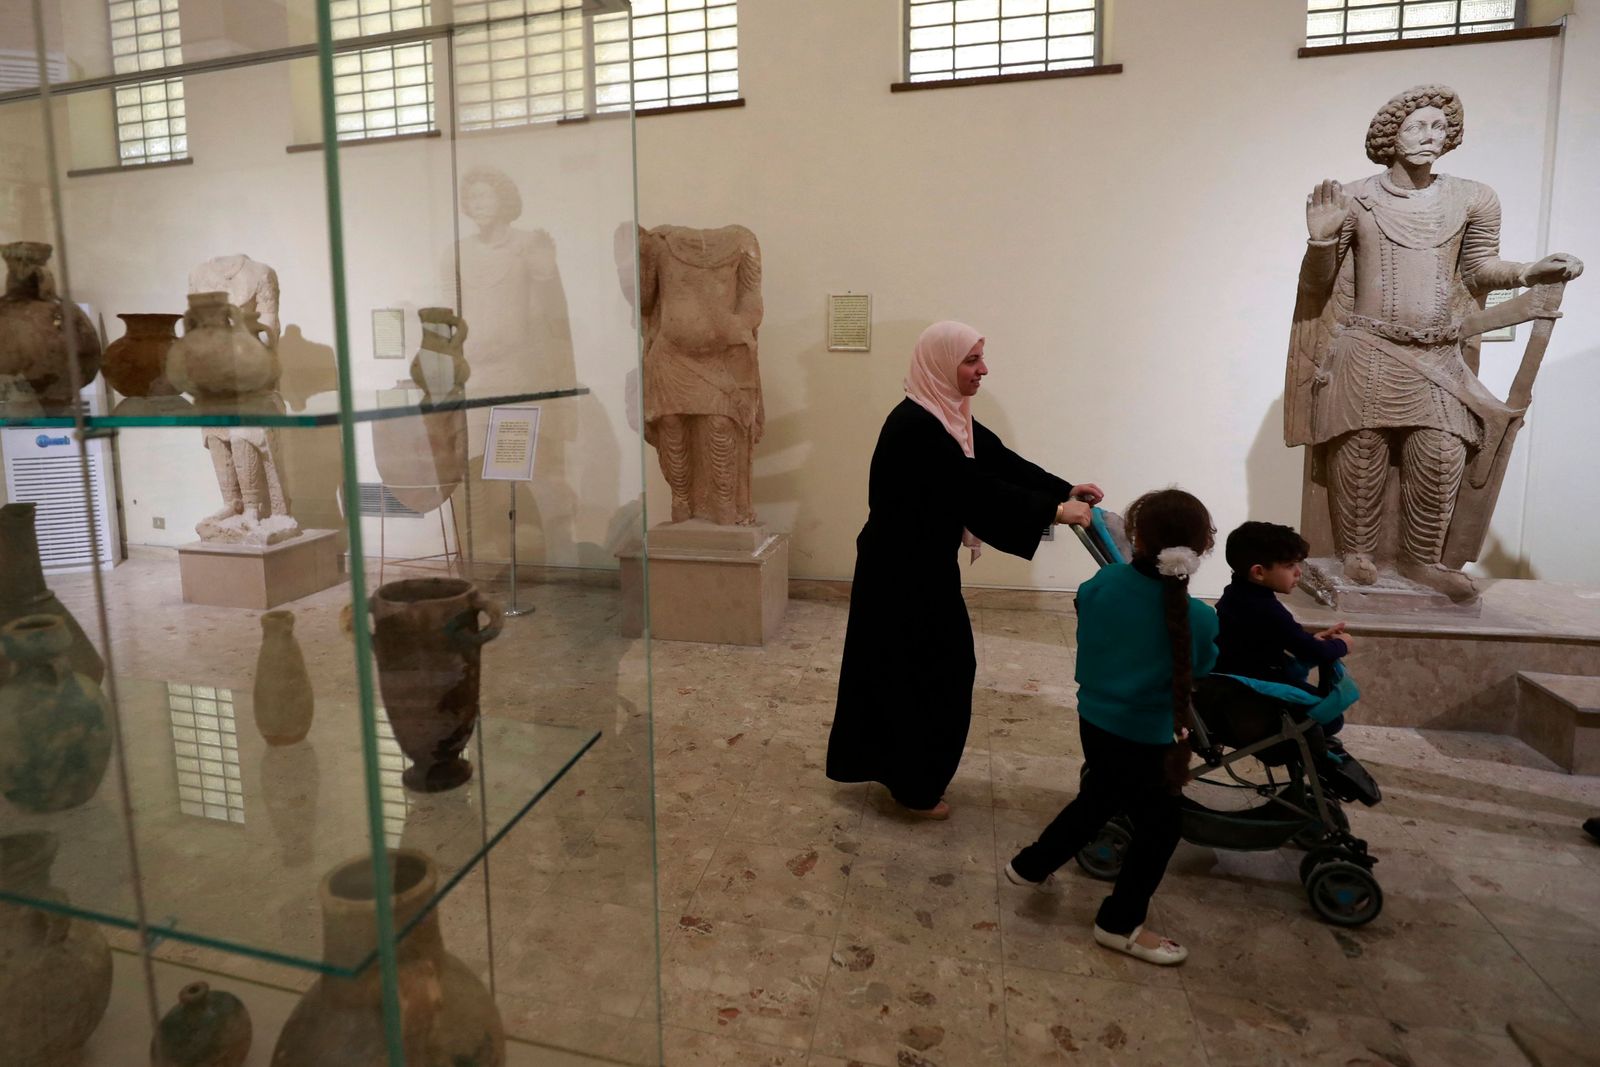 People visit Baghdad's national museum on February, 24, 2023, after it opened its doors to receive visitors free of charge every Friday. - Closed for three years as of 2019 due to demonstrations and then the Covid-19 pandemic, the museum reopened in March 2022. (Photo by AHMAD AL-RUBAYE / AFP) - AFP